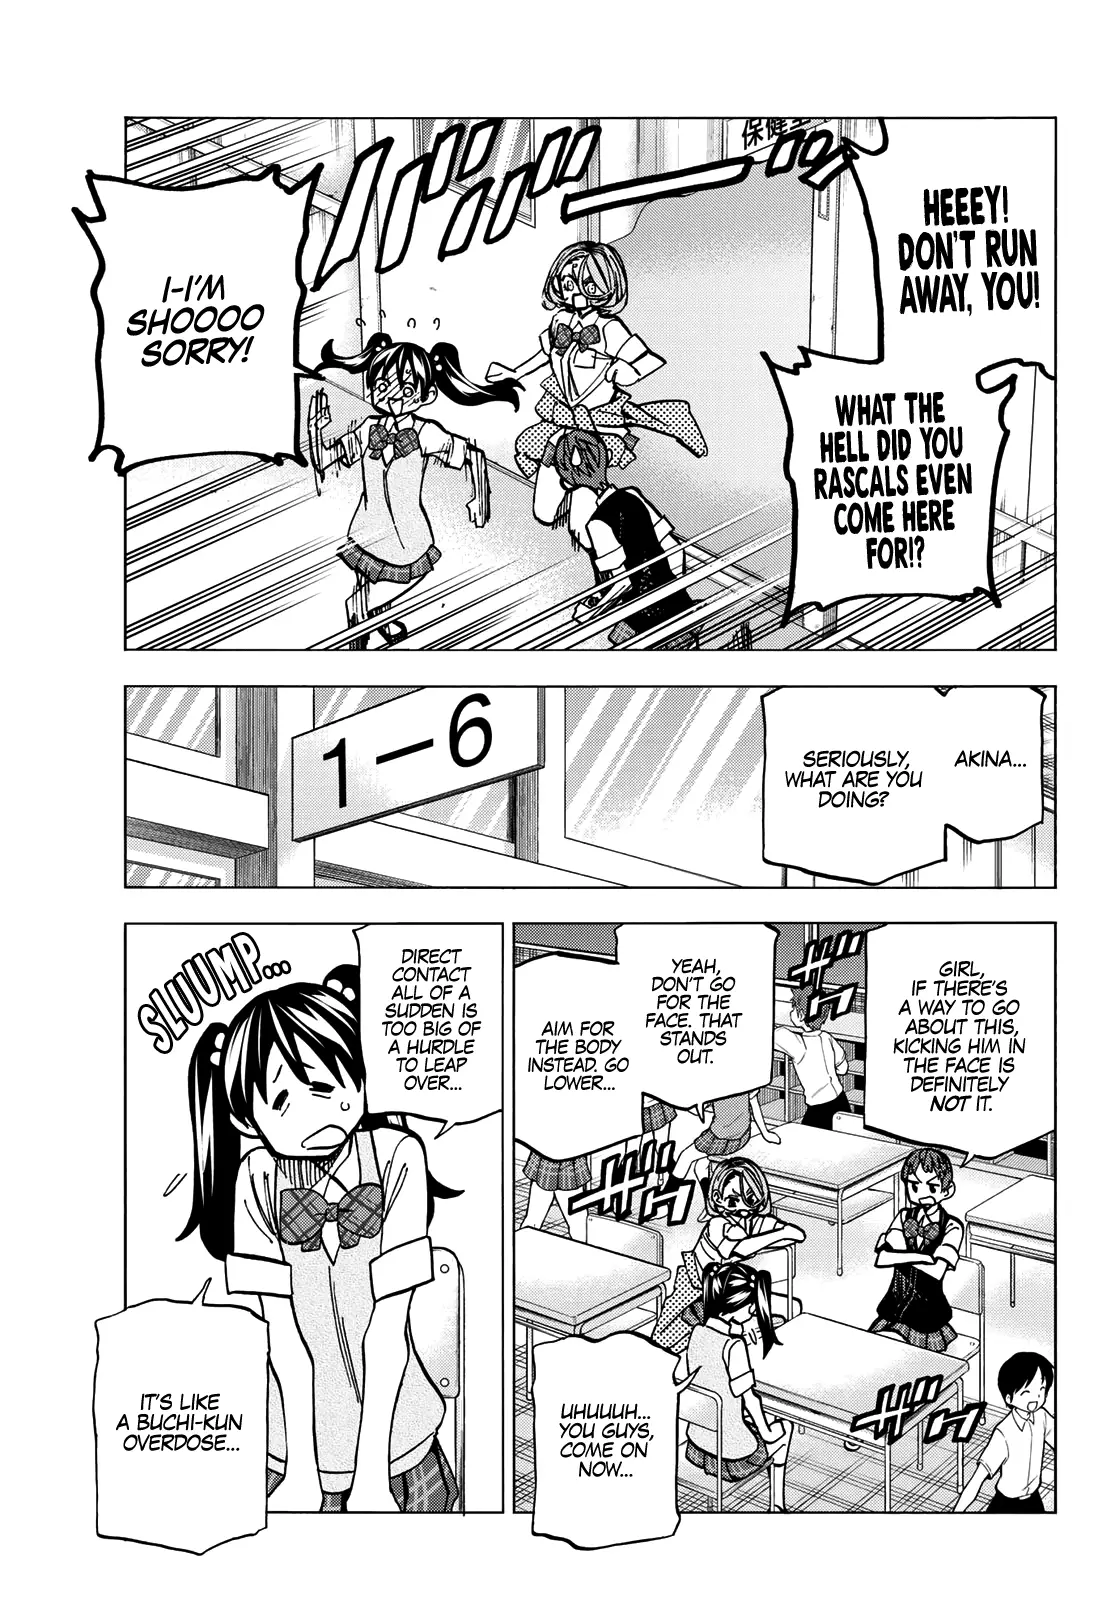 The Story Between A Dumb Prefect And A High School Girl With An Inappropriate Skirt Length - 10 page 8